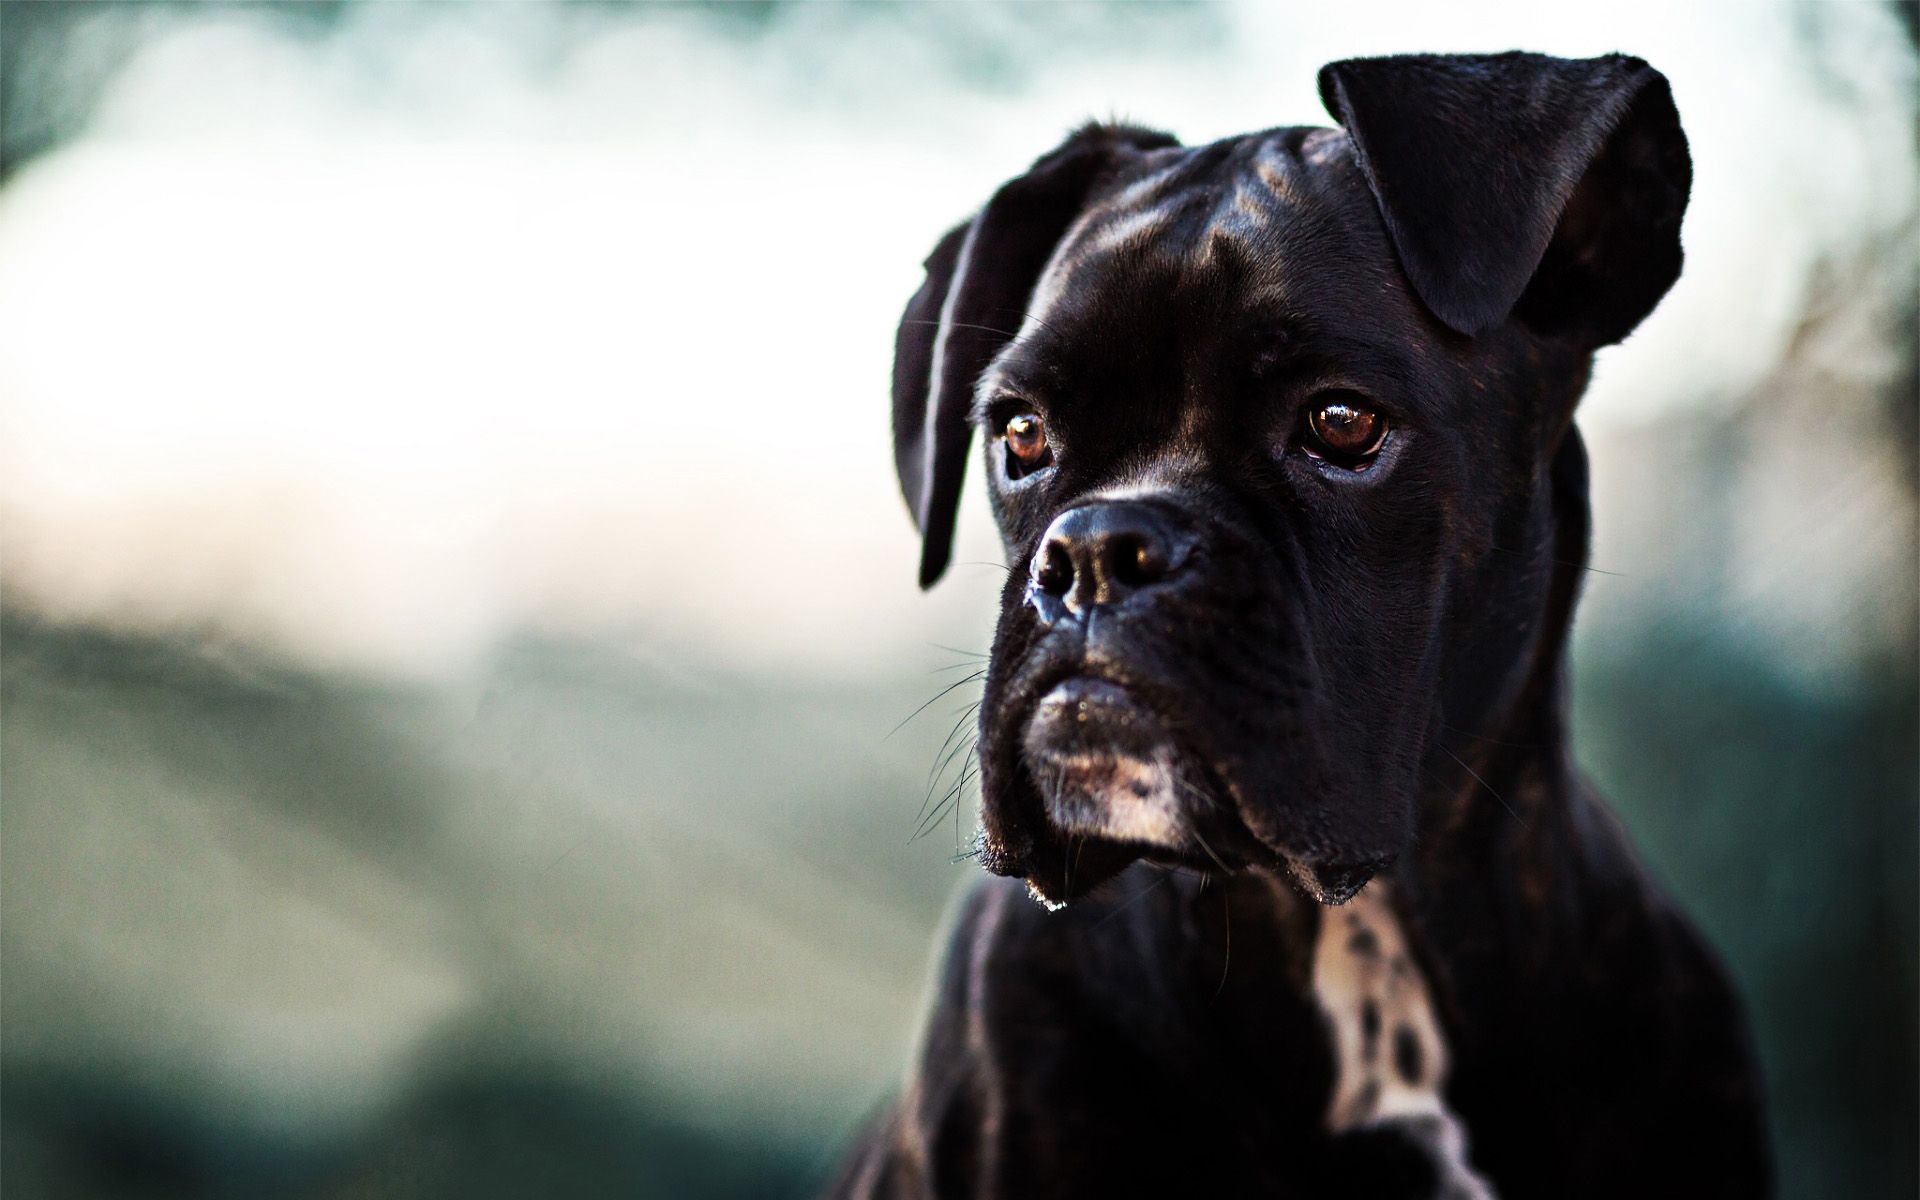 Download Wallpaper Black Boxer Dog, Puppy, Close Up, Pets, Bokeh, Black Dog, Boxer Dog For Desktop With Resolution 1920x1200. High Quality HD Picture Wallpaper